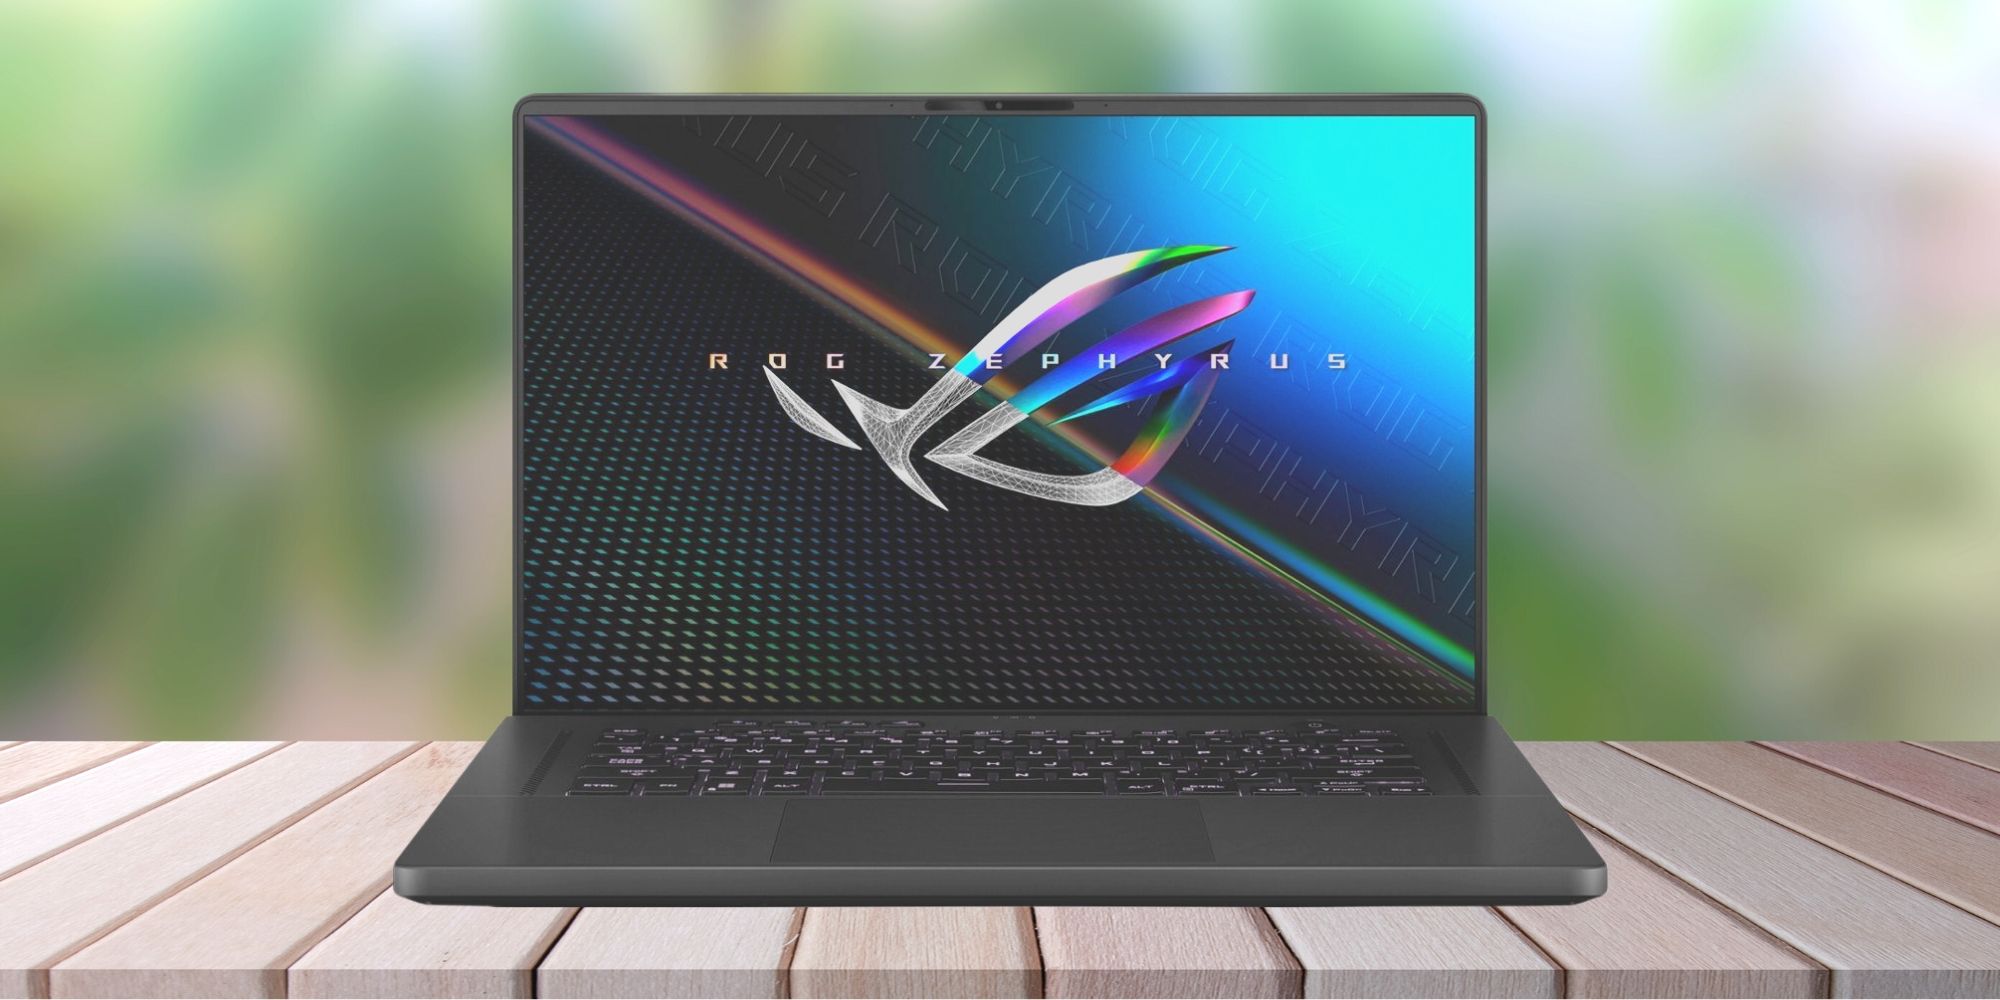 Image of the Asus ROG Zephyrus 16-inch Gaming laptop on a table